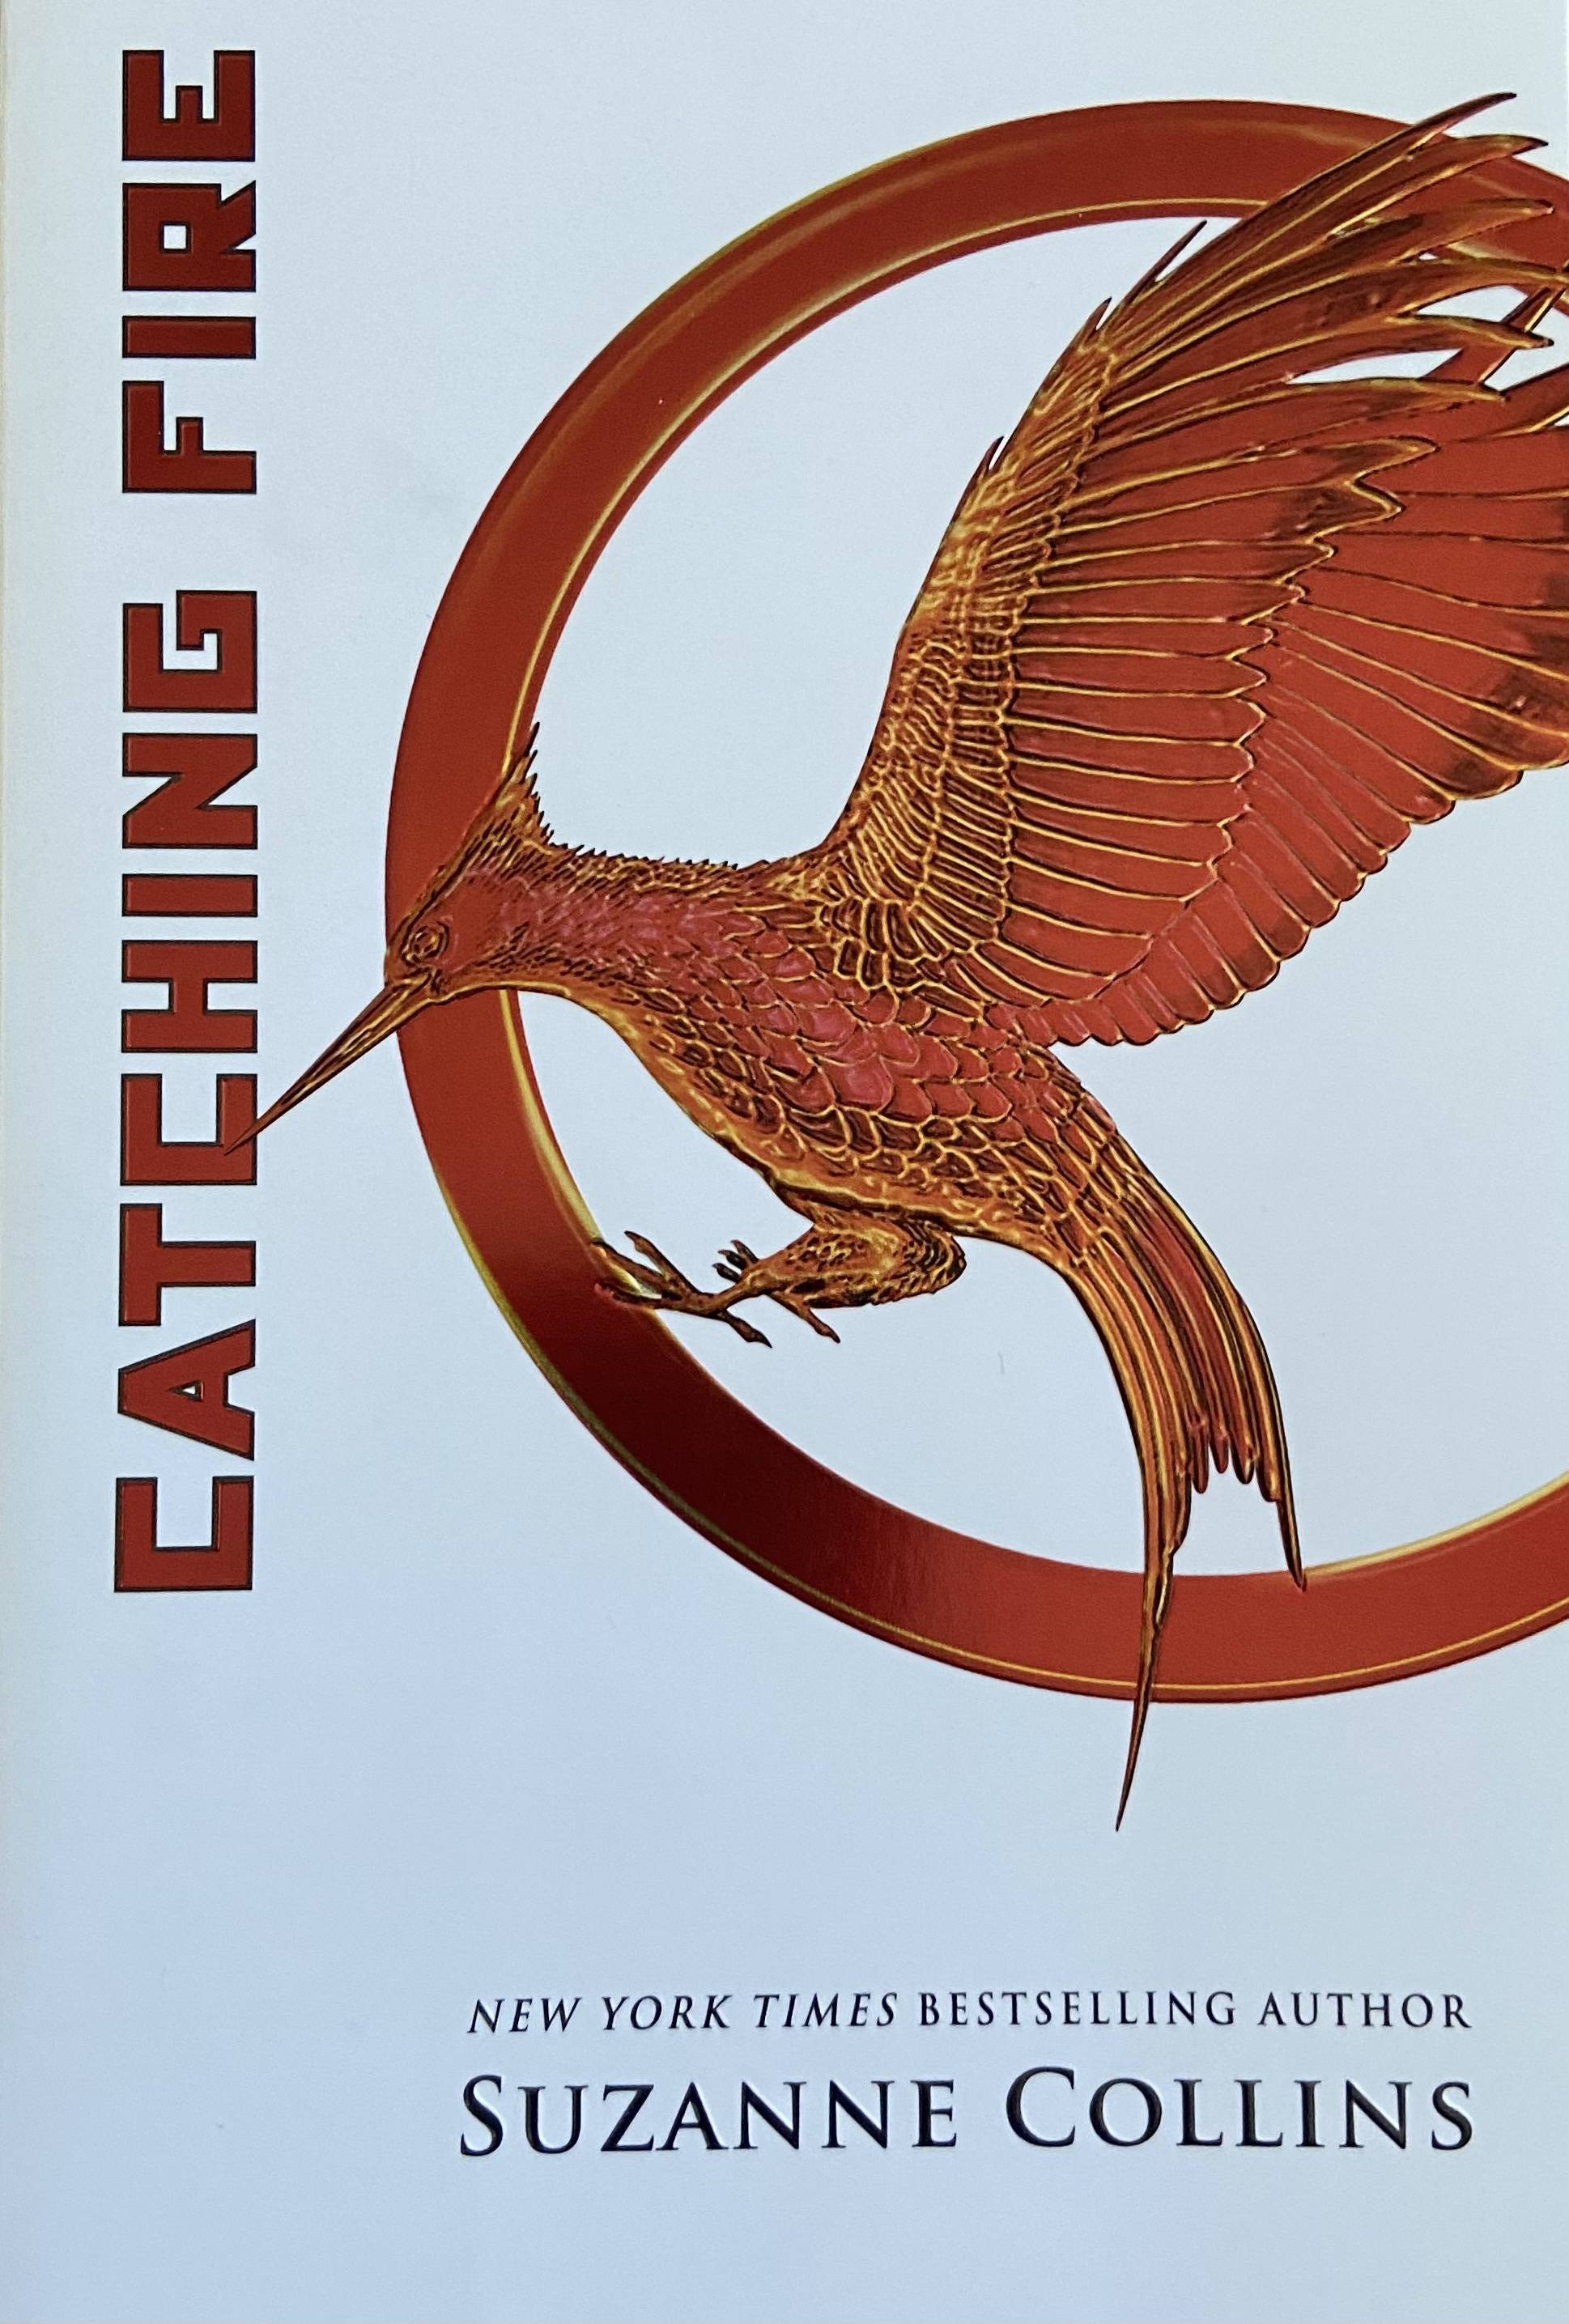 Catching Fire, Hunger Games (English Edition) by Suzanne Collins book